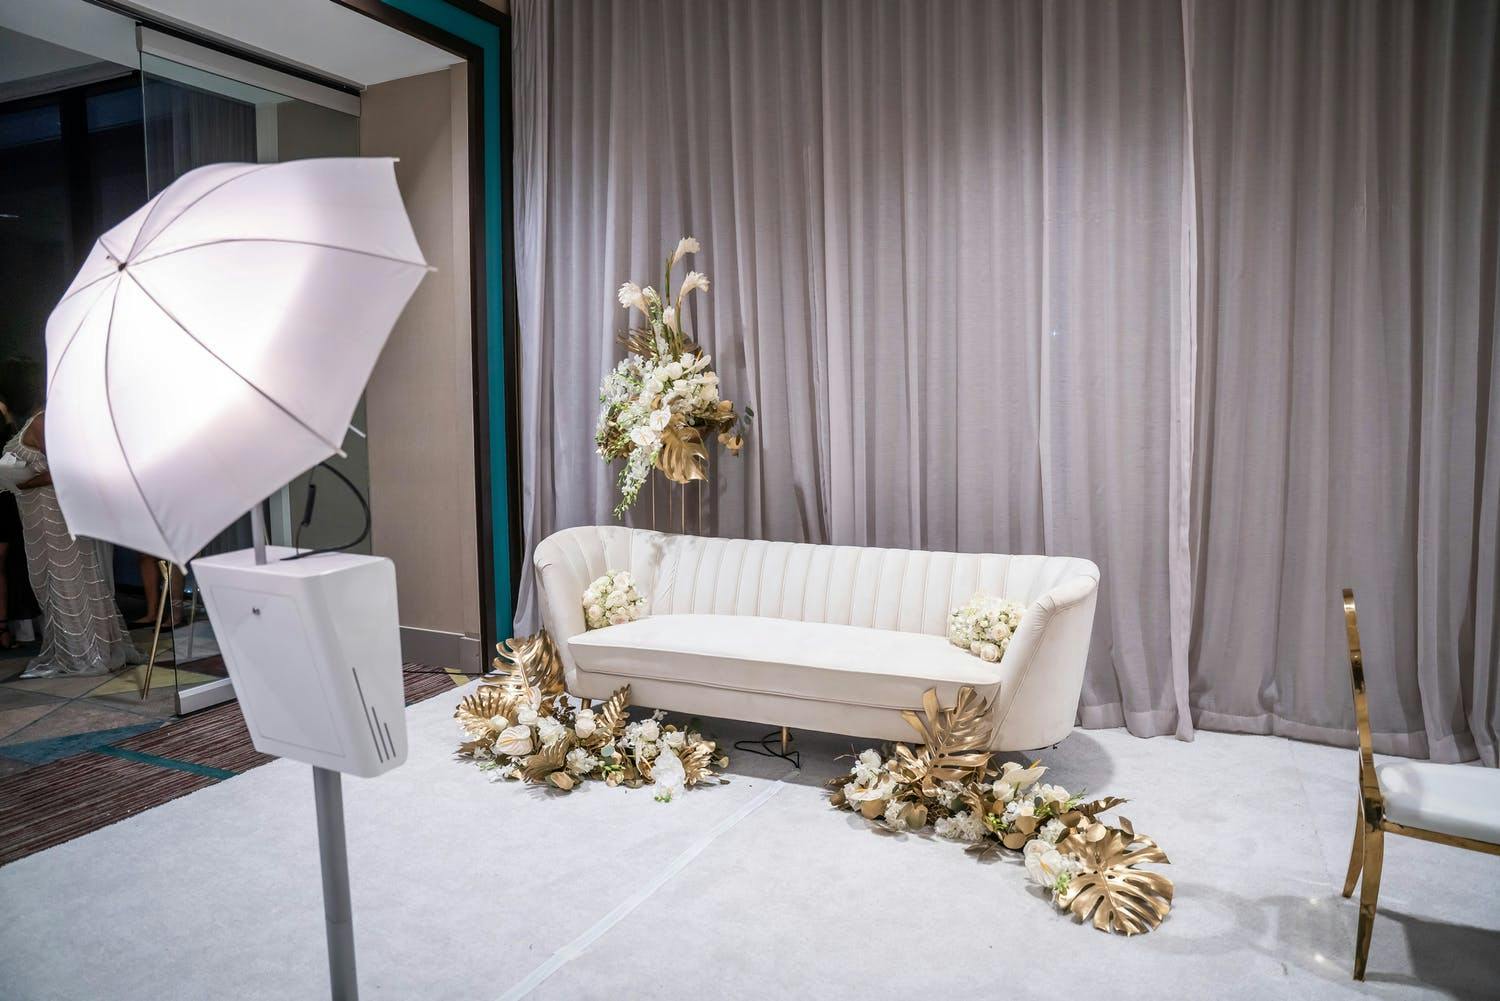 Minimalist Modern Wedding Décor Photo Op With White Sofa and Gold Florals | PartySlate